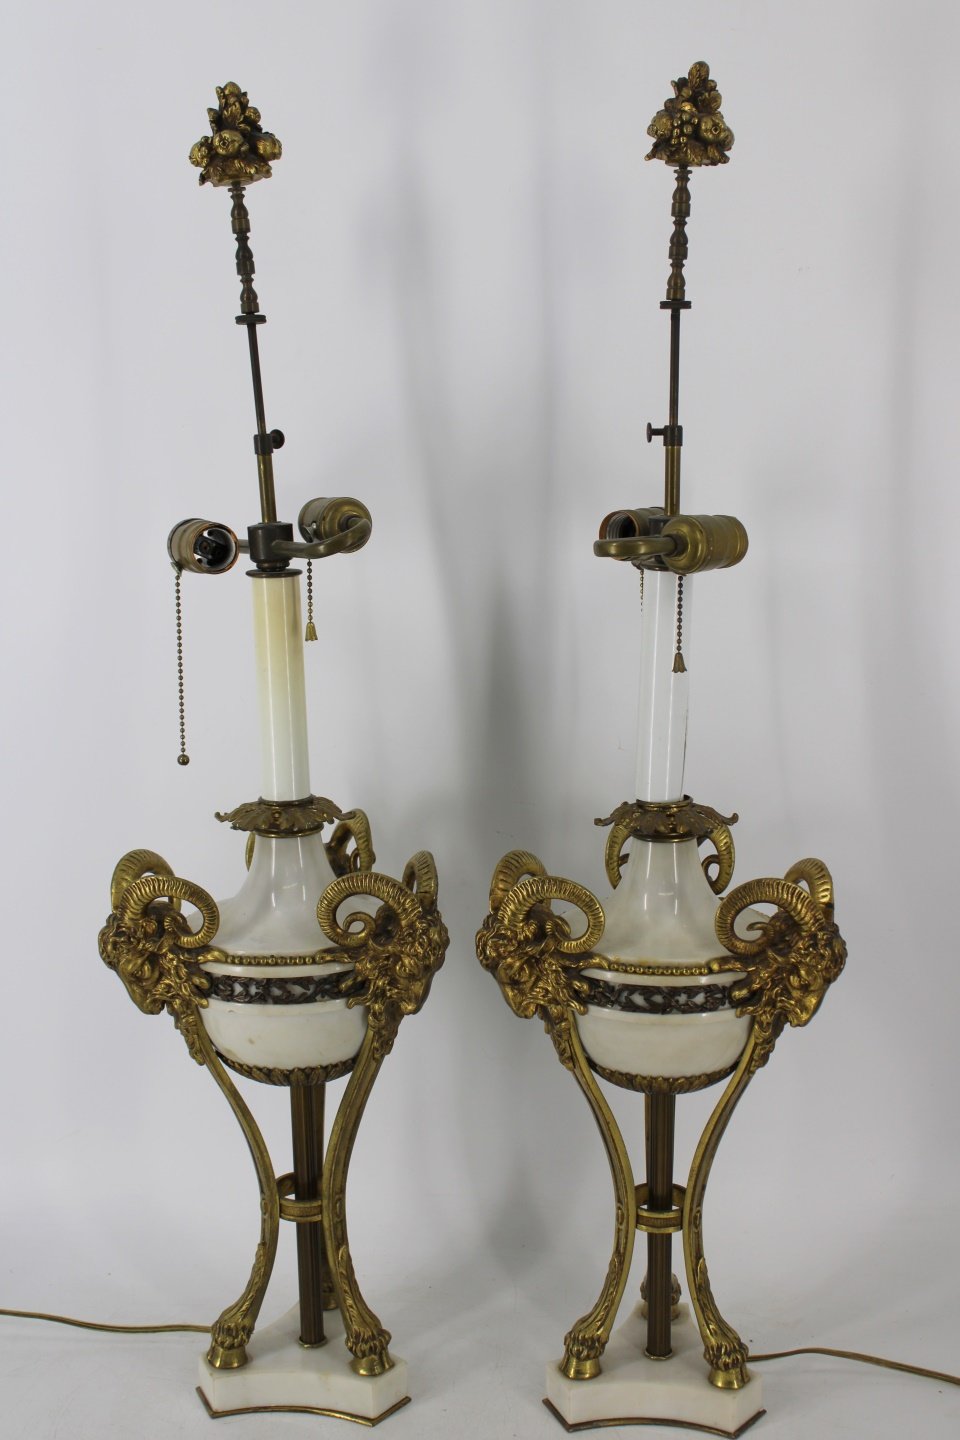 AN ANTIQUE PAIR OF BRONZE MOUNTED